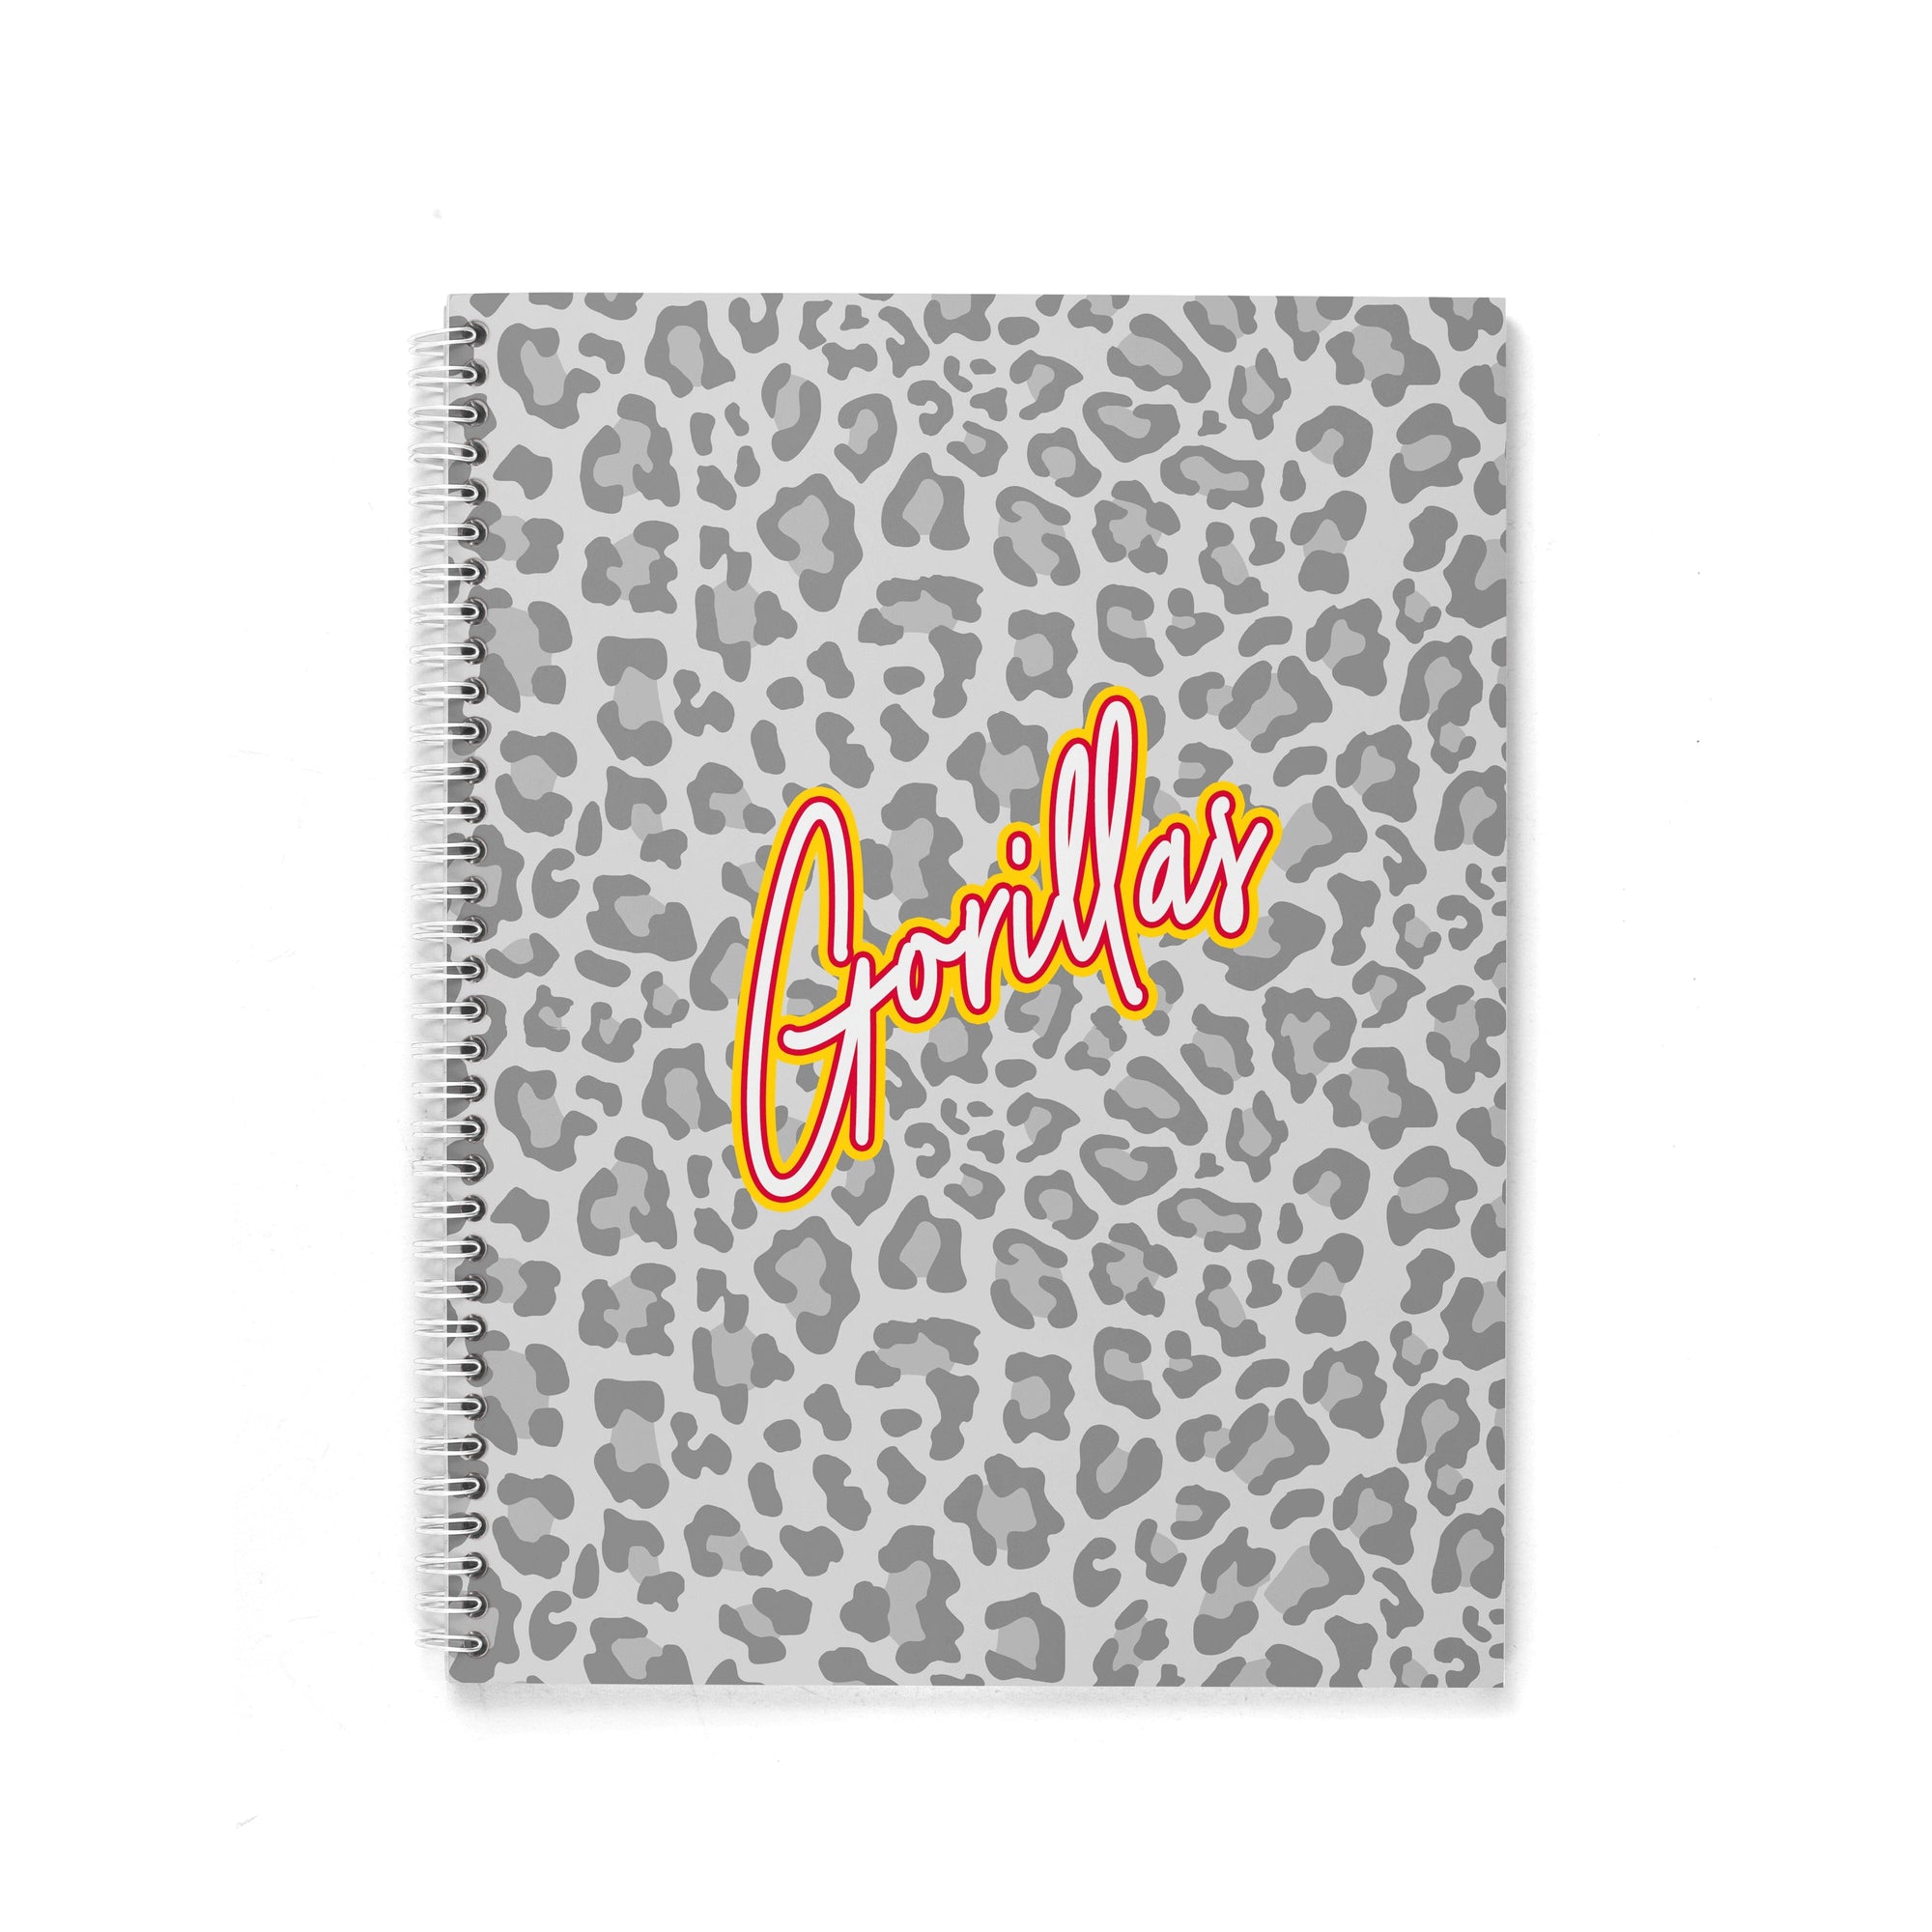 LEOPARD MASCOT PERSONALIZED SPIRAL NOTEBOOK (US ONLY)